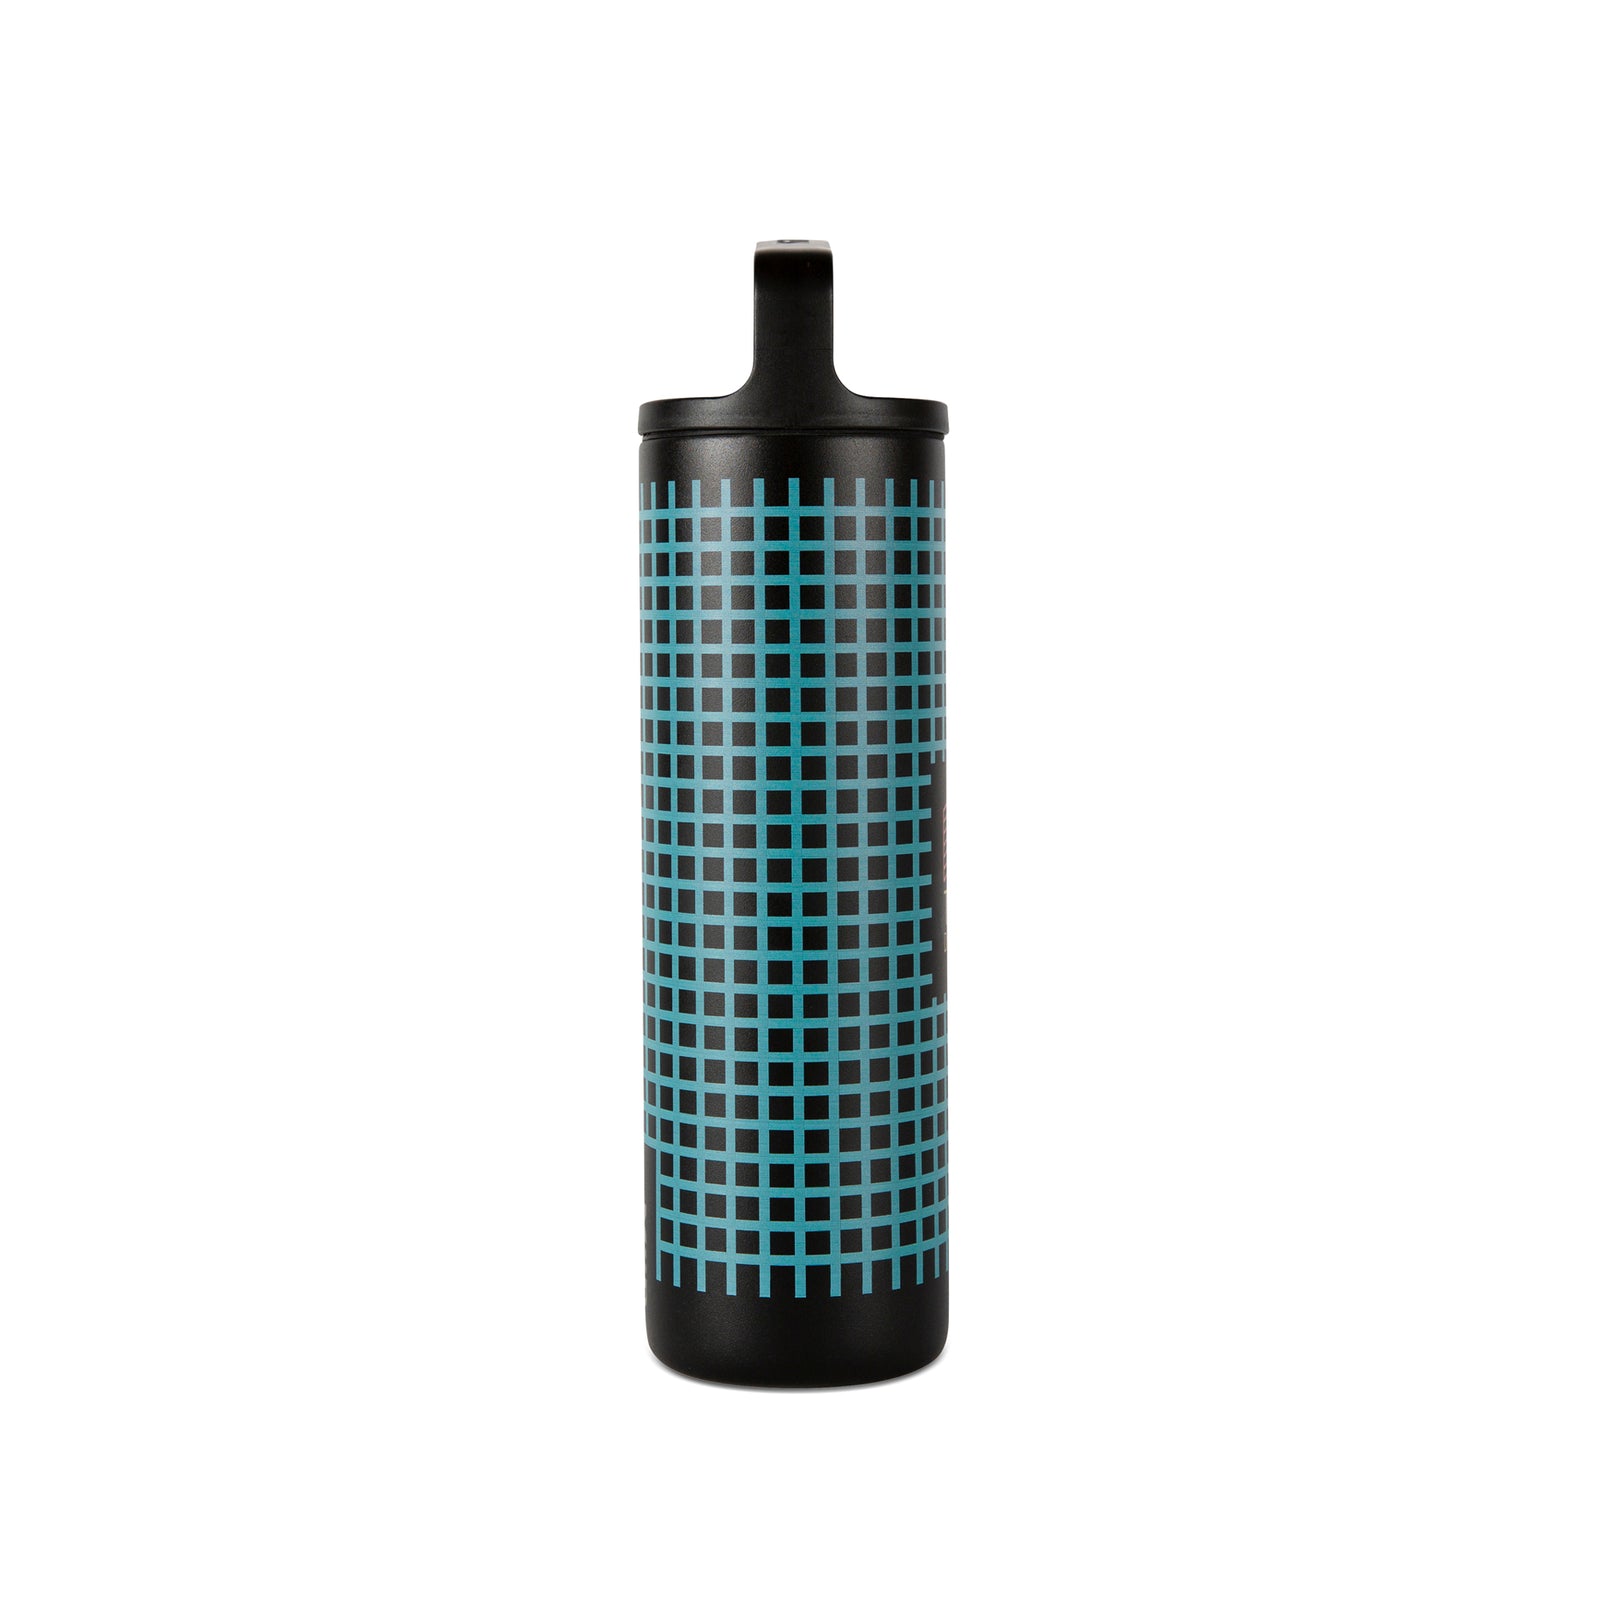 Full product shot of the Topo Designs x Miir Water Bottle showing size and Topo Designs grid pattern from the side in "Black Grid".